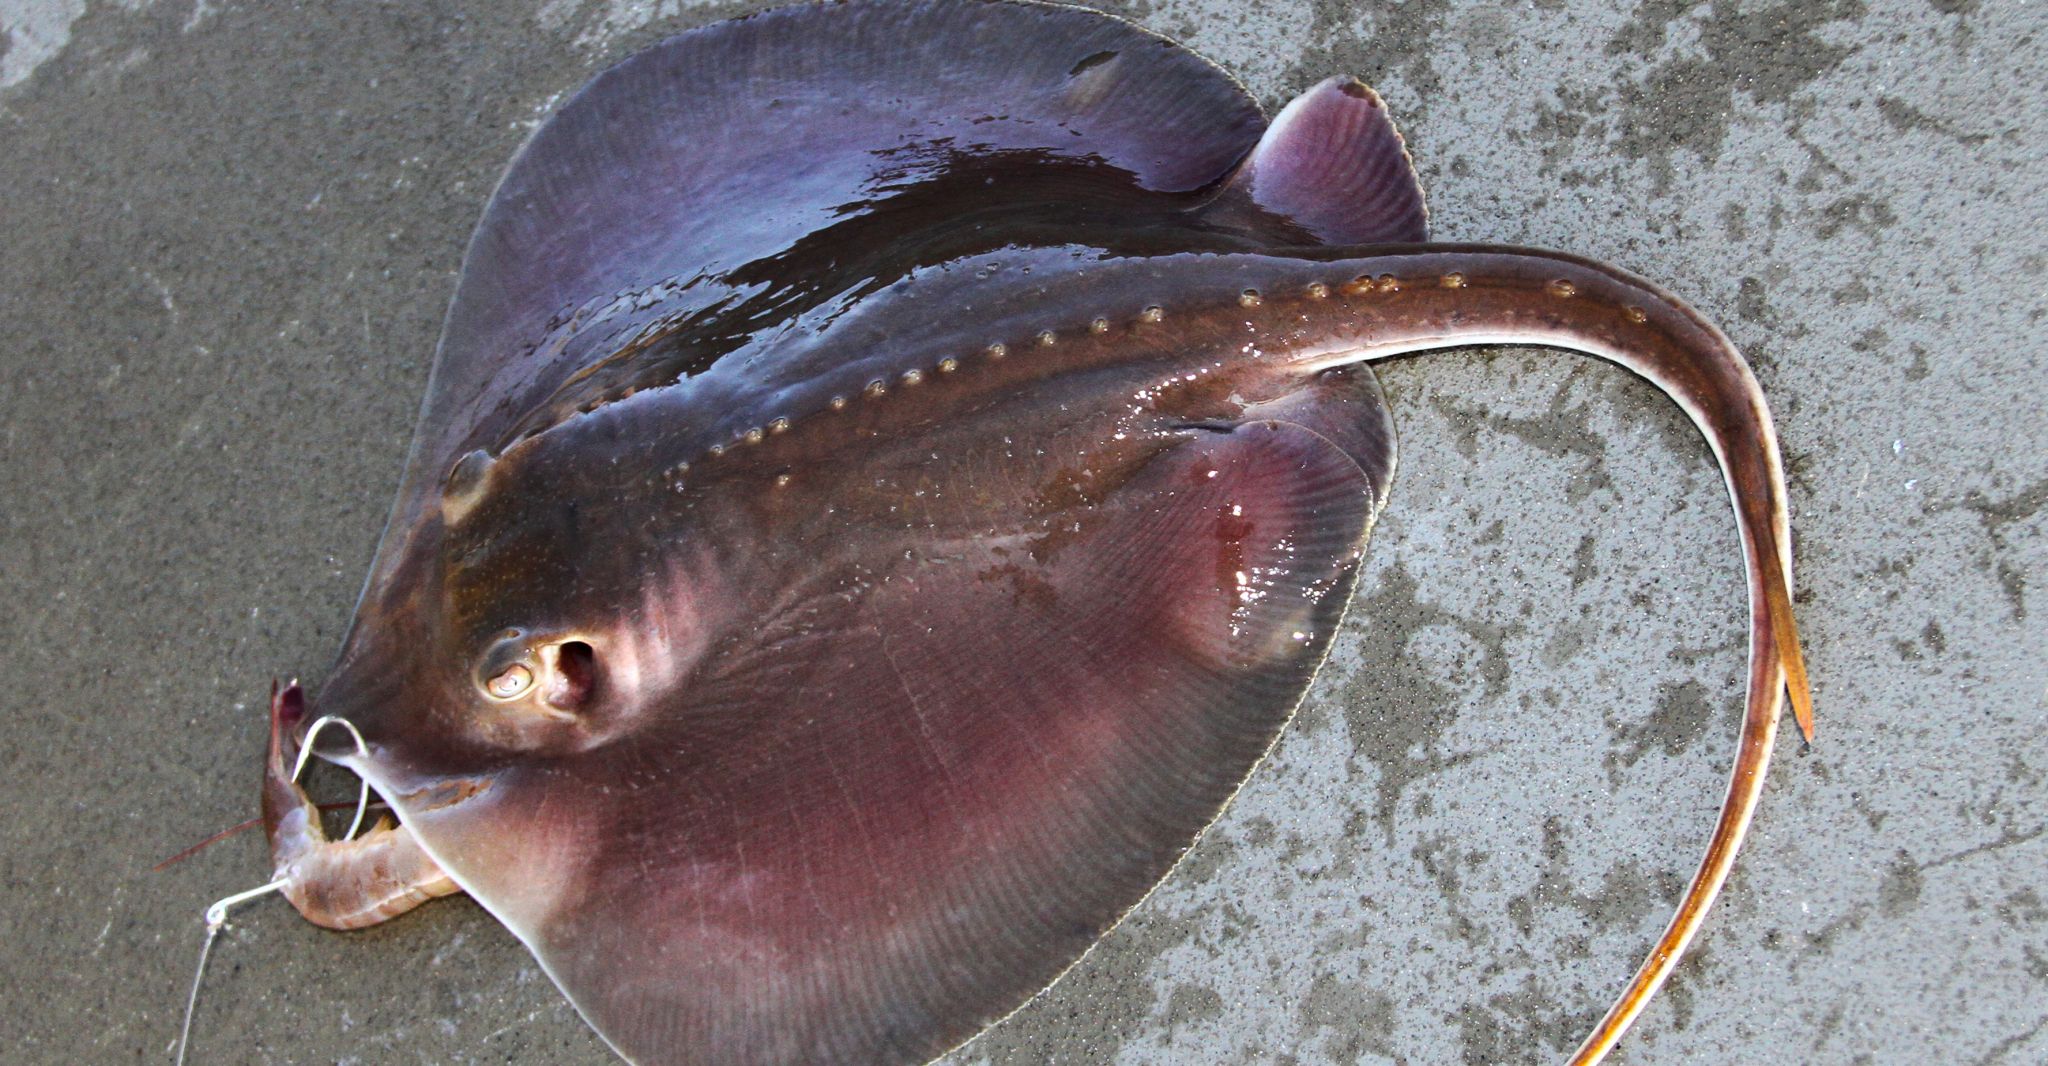 Stingrays prove to be sticking point for many Gulf anglers - Houston Chronicle2048 x 1066